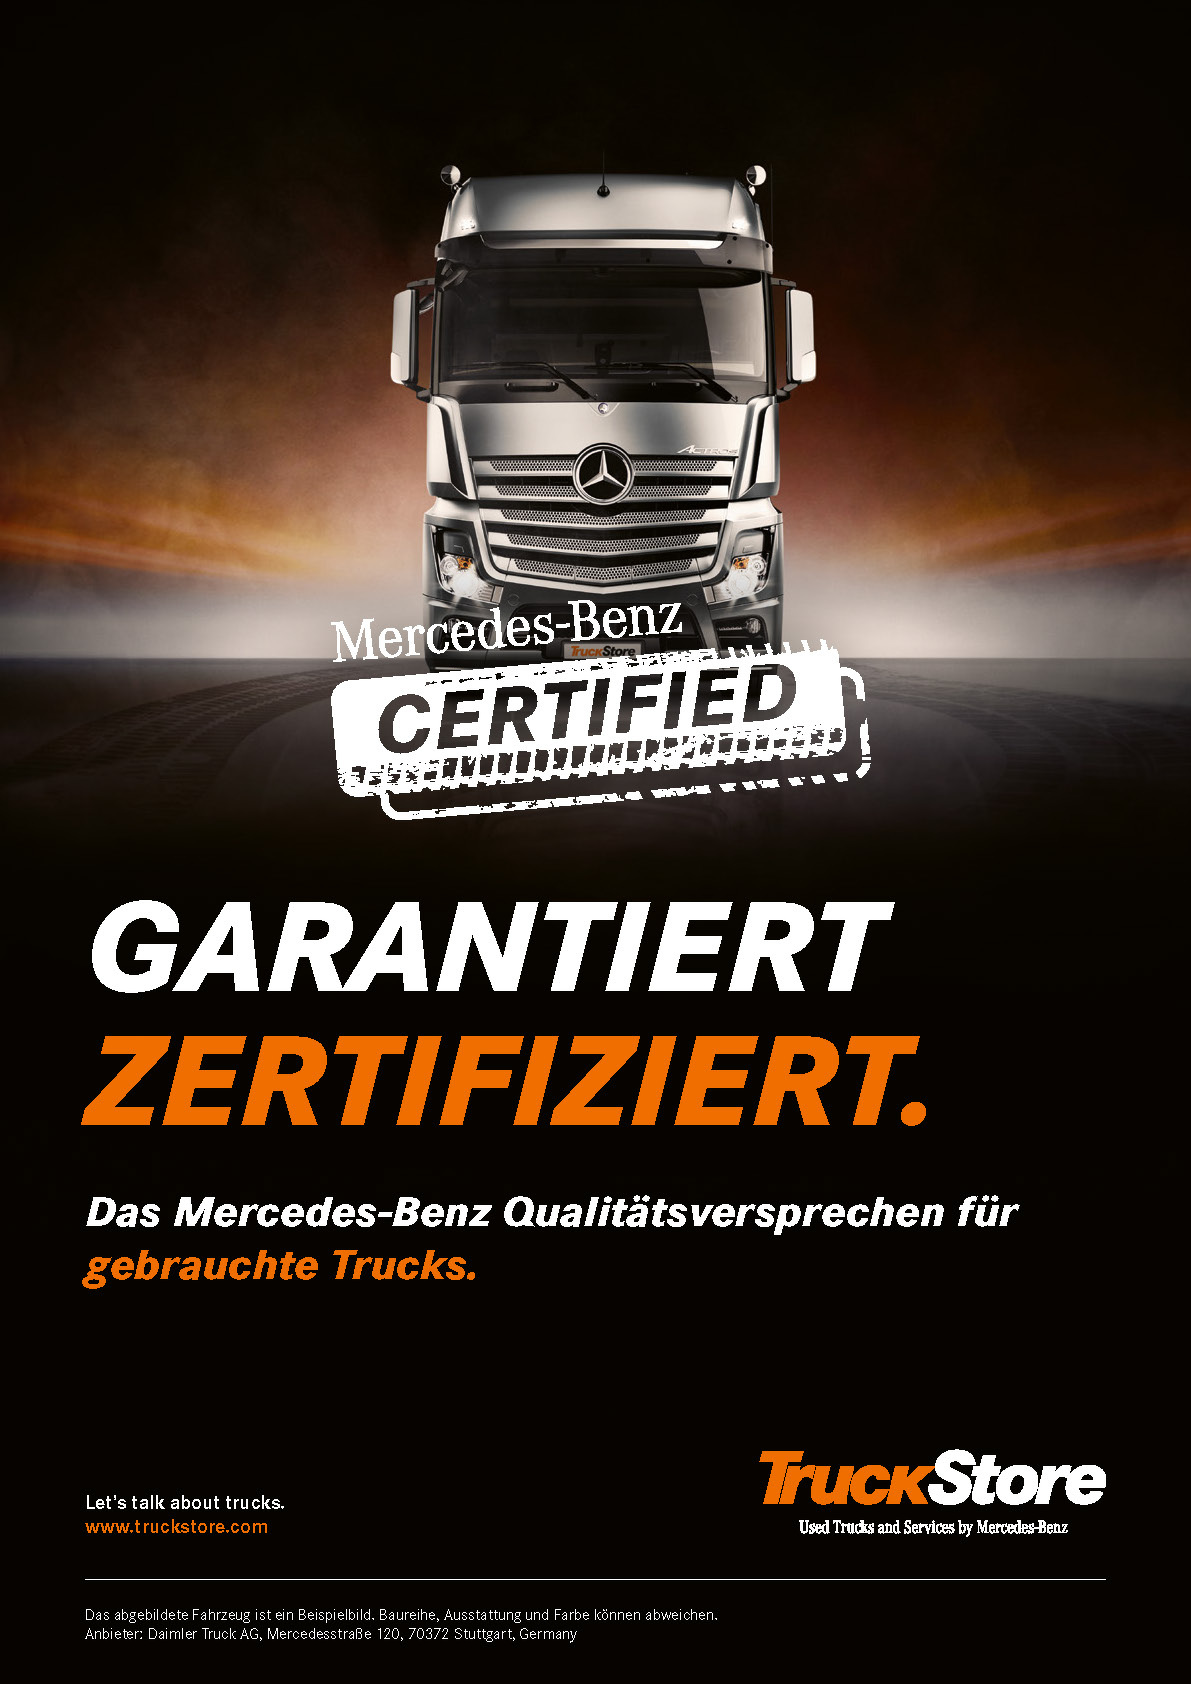 New label for used trucks with a quality commitment: "Mercedes-Benz Certified" now available in Germany